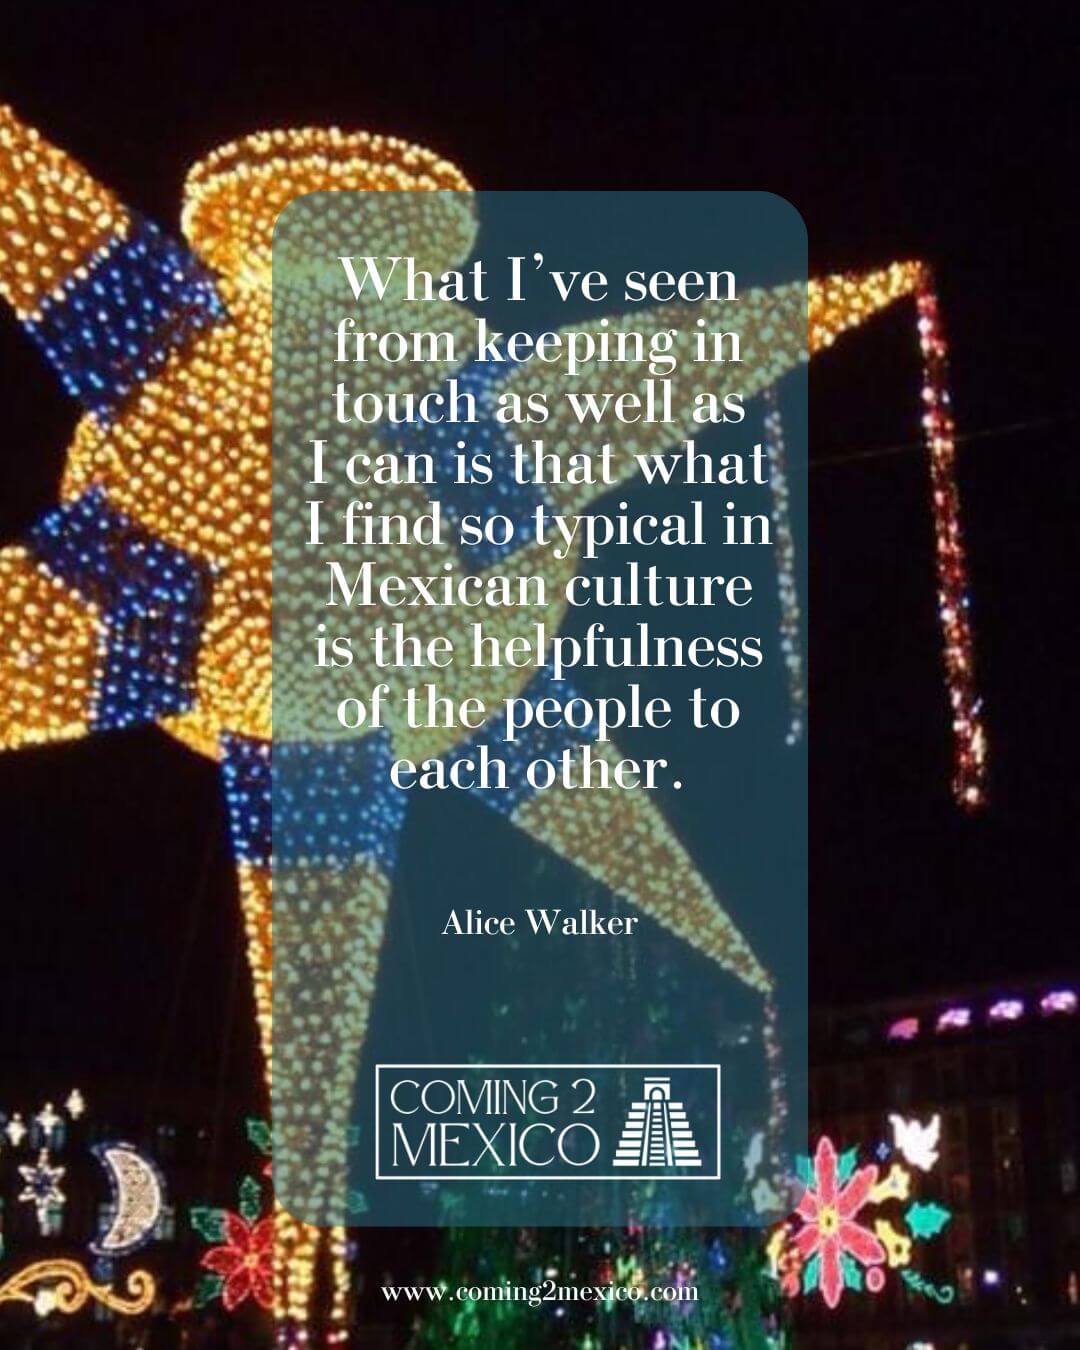 “What I’ve seen from keeping in touch as well as I can is that what I find so typical in Mexican culture is the helpfulness of the people to each other." - Alice Walker